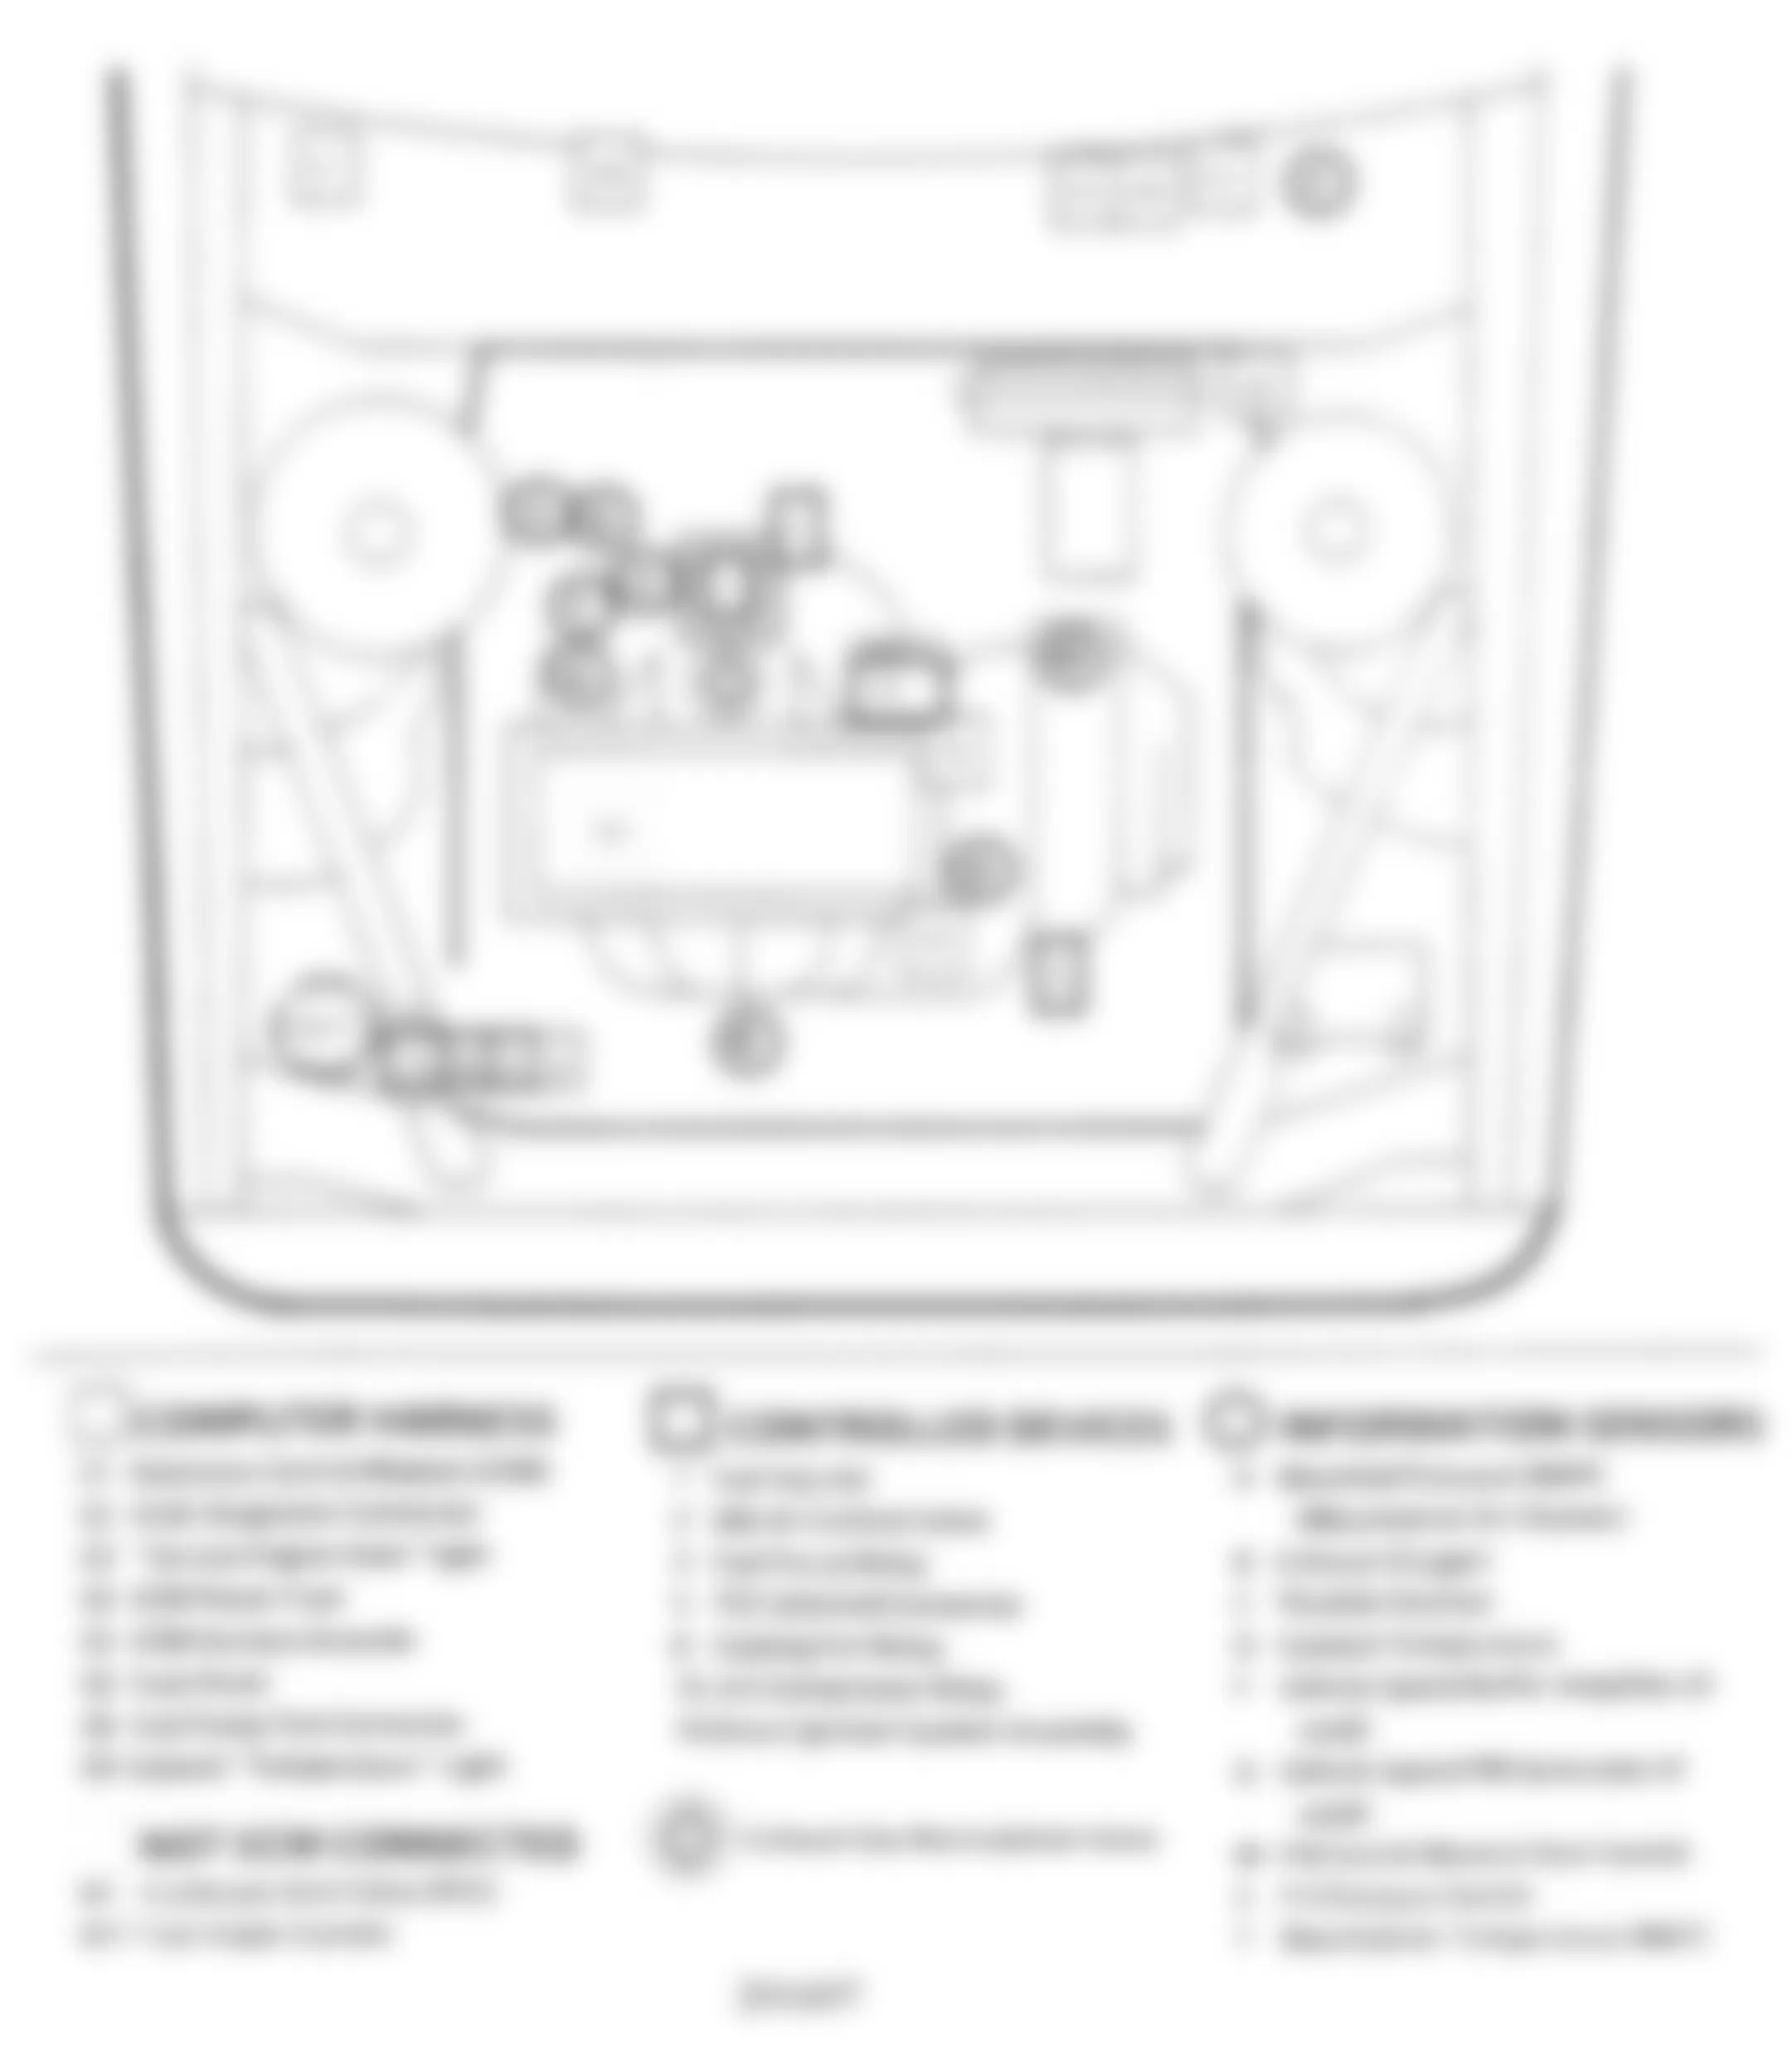 Buick Skylark 1990 - Component Locations -  Component Locations (4 Of 6)